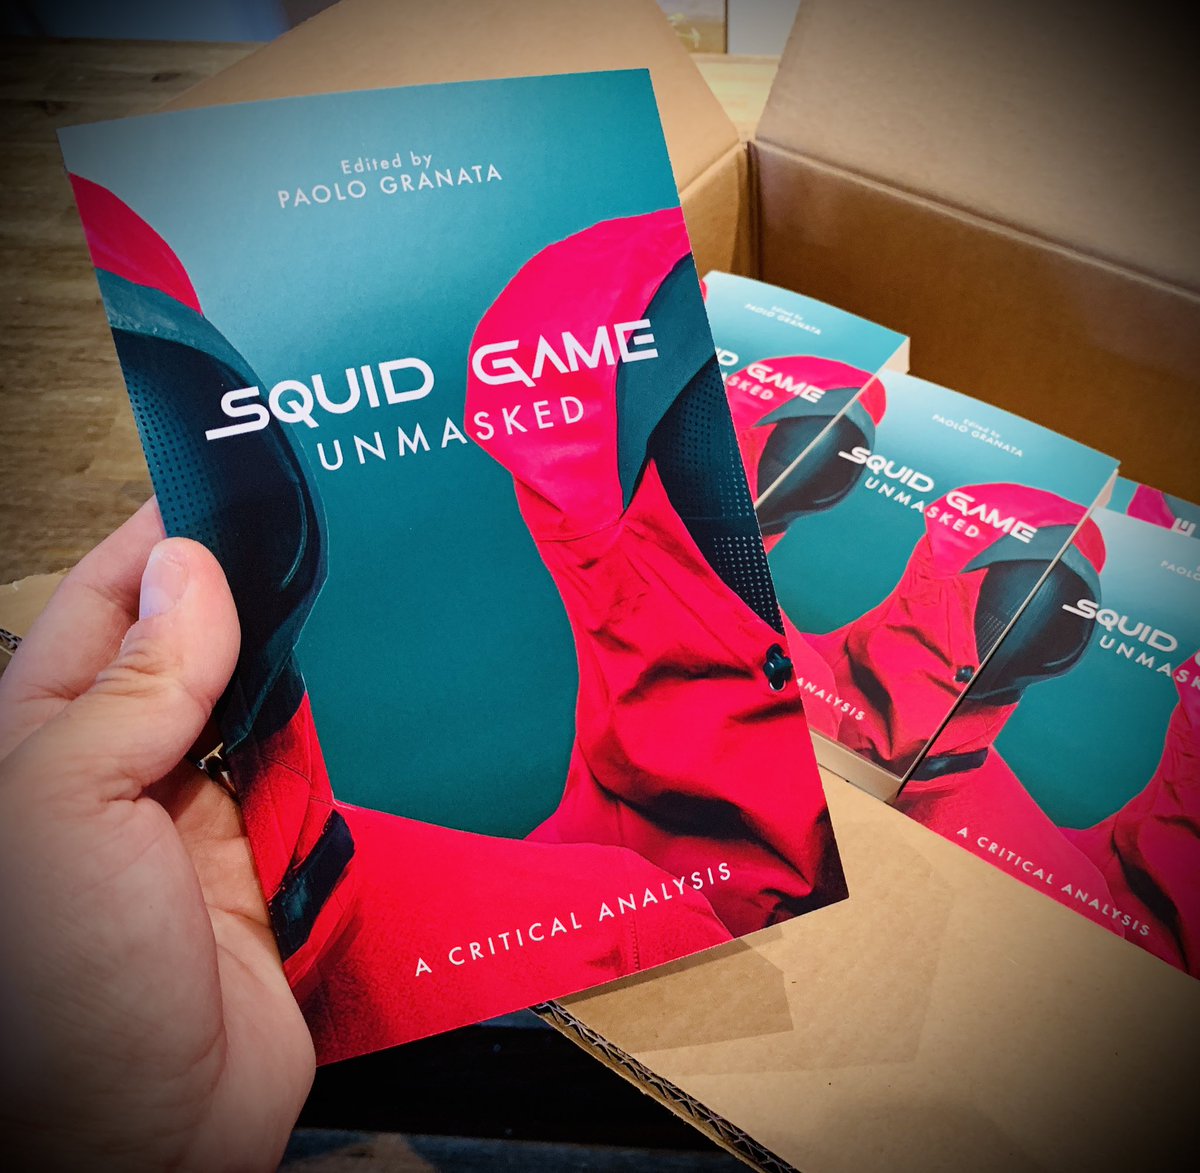 My book 'Squid Game Unmasked' has just rolled hot off the press!
I’m so excited for the launch at the U of T Alumni Reunion 2023 and for my “Surviving Squid Game” stress-free lecture this Saturday, June 3rd!

#SquidGame #uoftalumni @uStMikes @UofTArtSci @global_uoft #UofTreunion